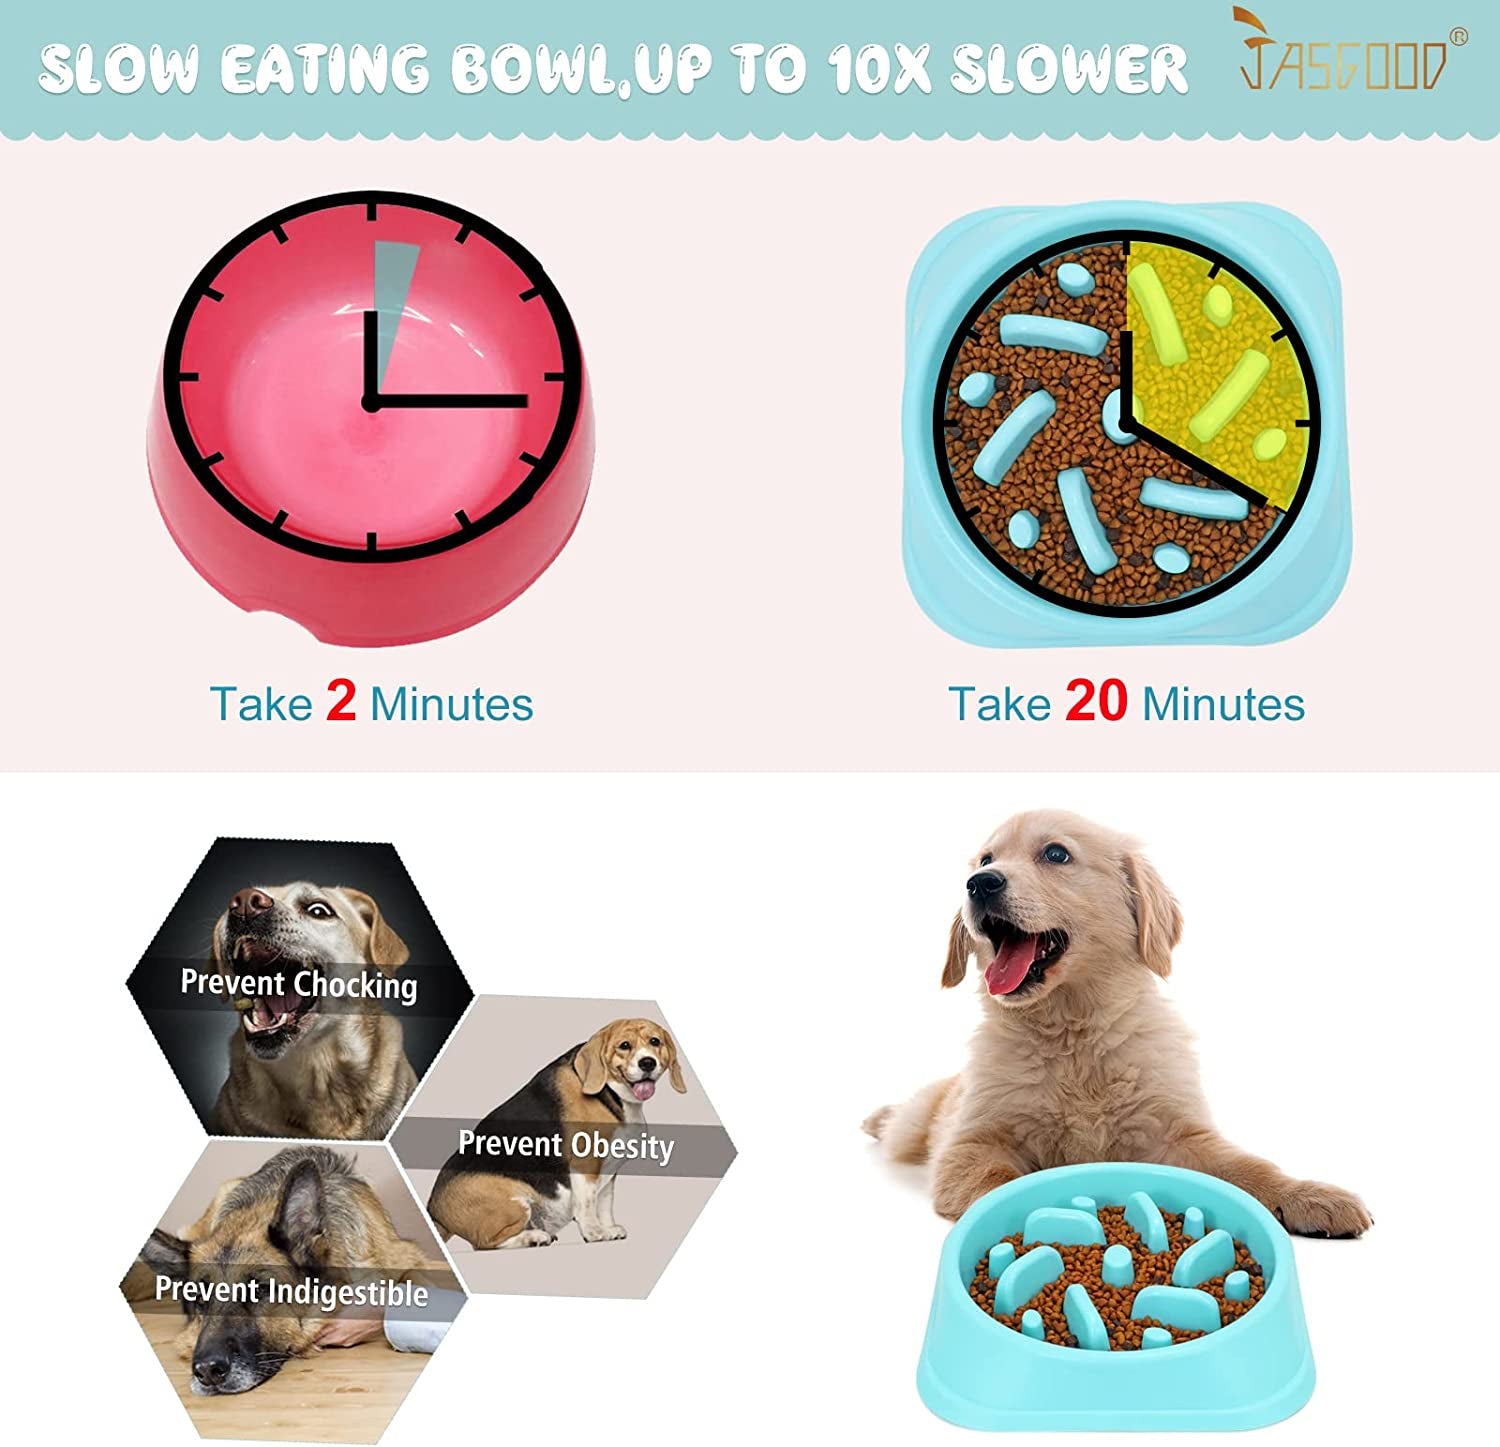 Slow Eating Dog Bowl - Eco-Friendly, Non-Toxic, Prevents Choking and Bloating